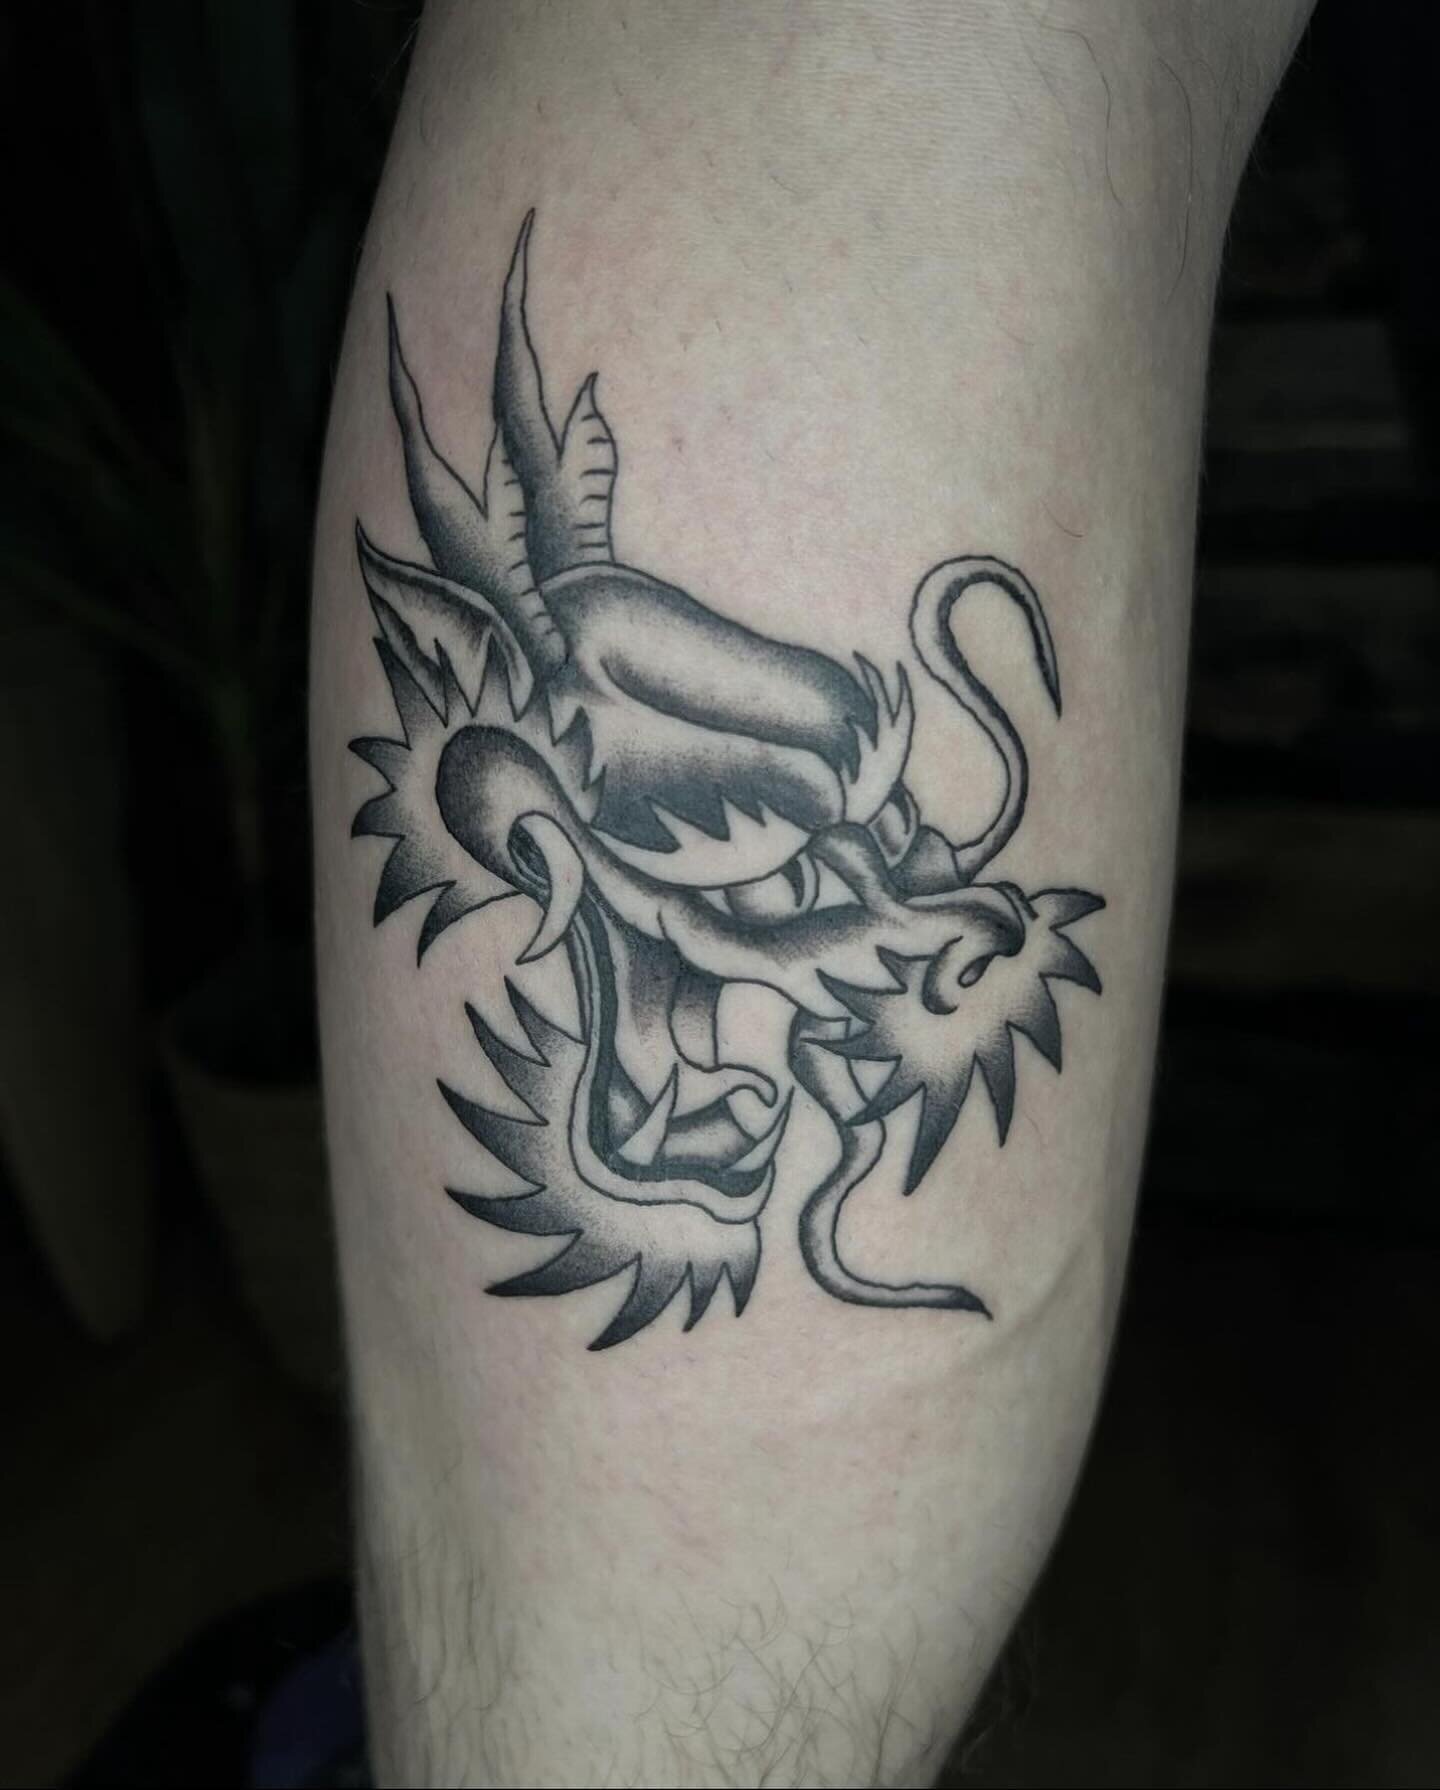 Vintage Japanese dragon head by @gfoxtattoos 
.
.
.
.
.
,
,
.
.
Newcastle under Lyme appointment only tattoo studio, DM or fill out the enquiry form in my bio for enquiries.
.
#tattoo #traditionaltattoo #radtrad #tradworkers #japanesetattoo #linework